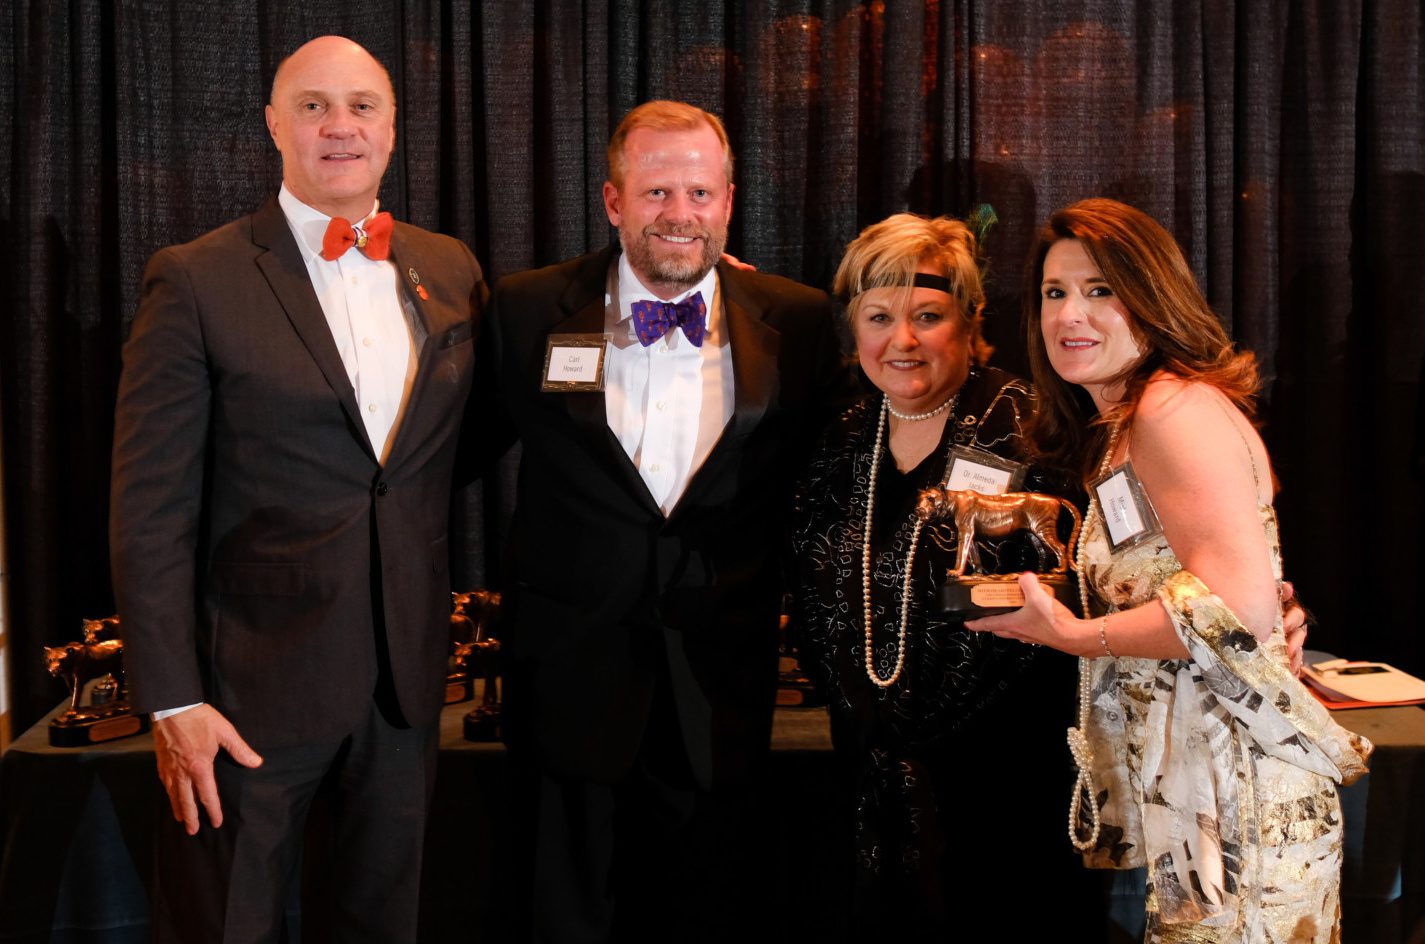 (L-R) Jim Clements, Carl Howard, Almeda Jacks and Misty Howard at the 2019 Student Affairs Gala in February.